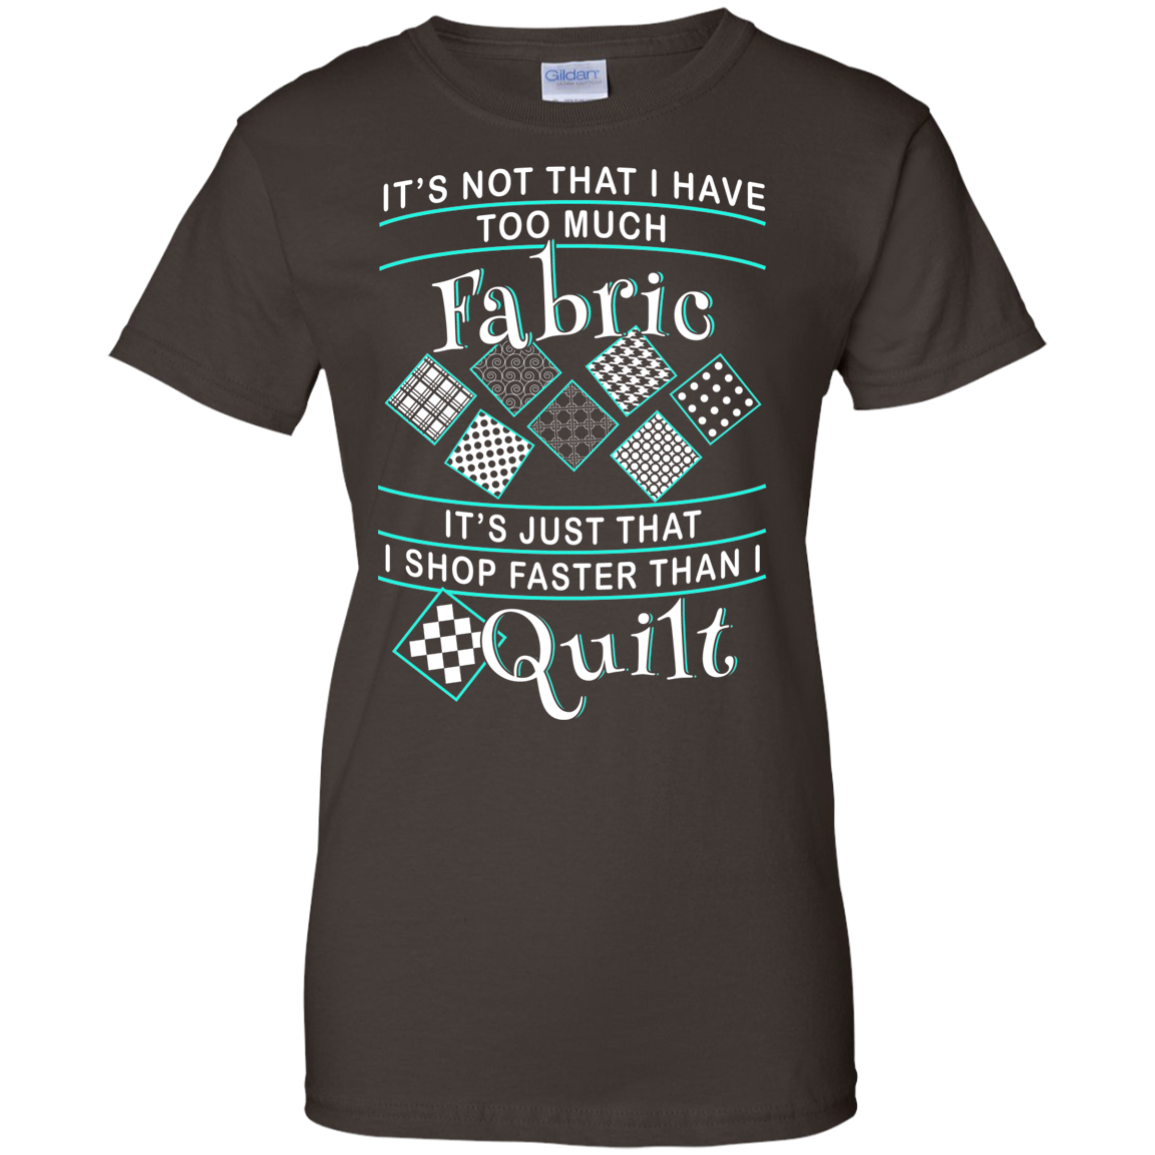 I Shop Faster than I Quilt Ladies Custom 100% Cotton T-Shirt - Crafter4Life - 4